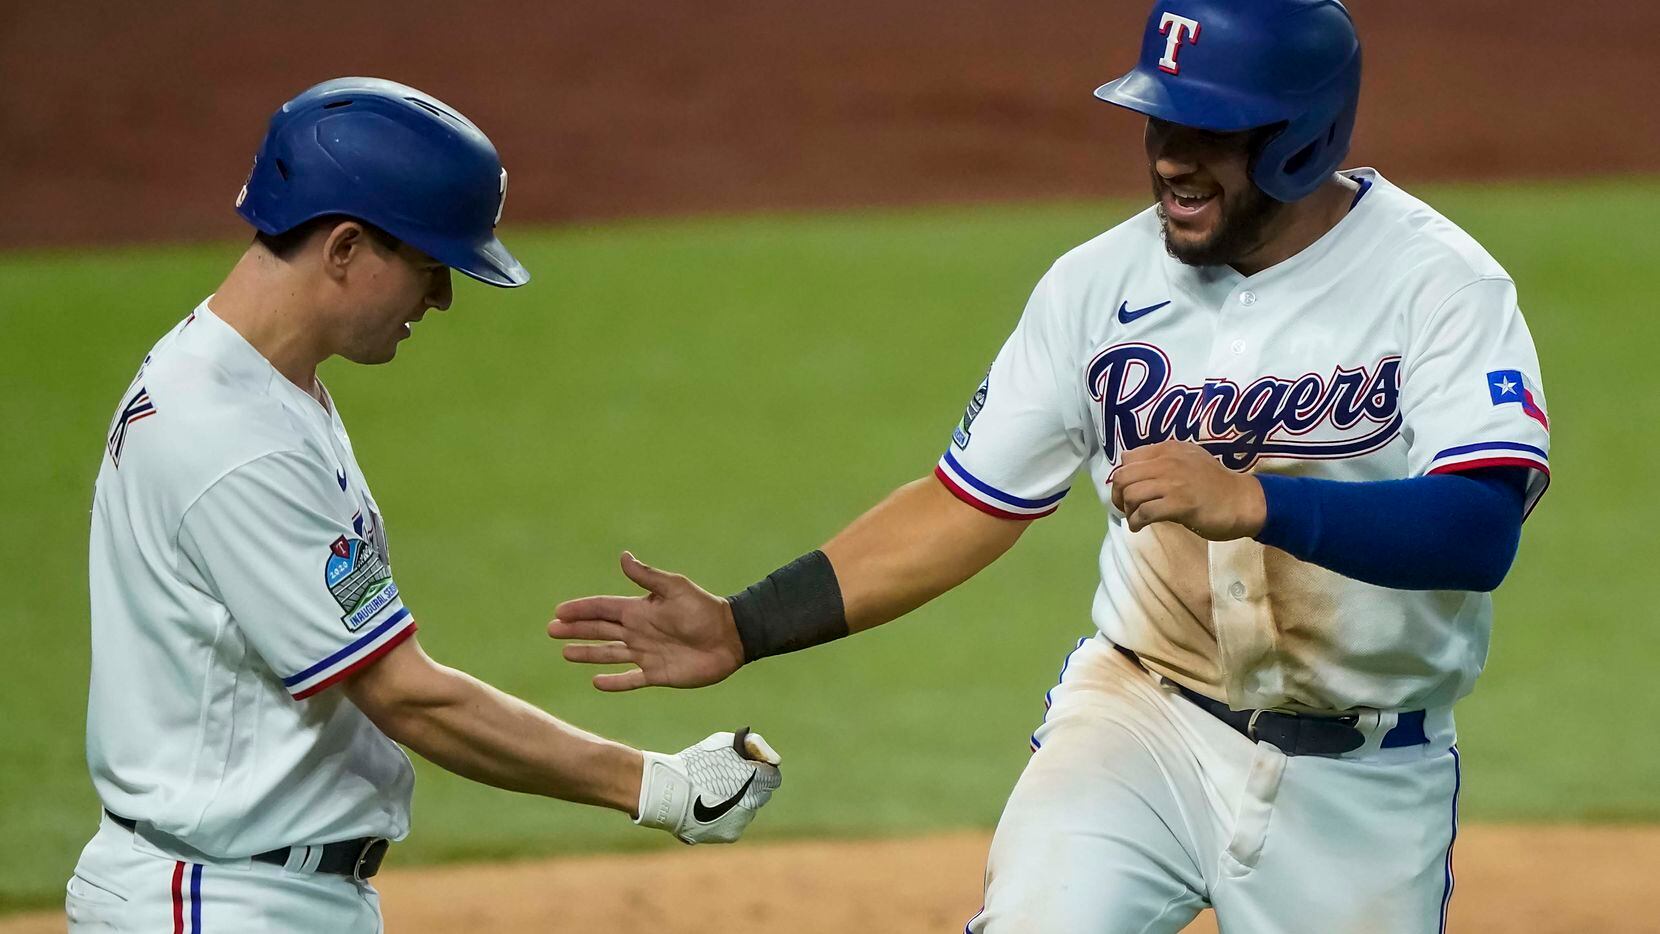 Catcher Jose Trevino (right) celebrates with Nick Solak after scoring a run in an intrasquad game during Texas Rangers Summer Camp at Globe Life Field on Saturday, July 18, 2020. 